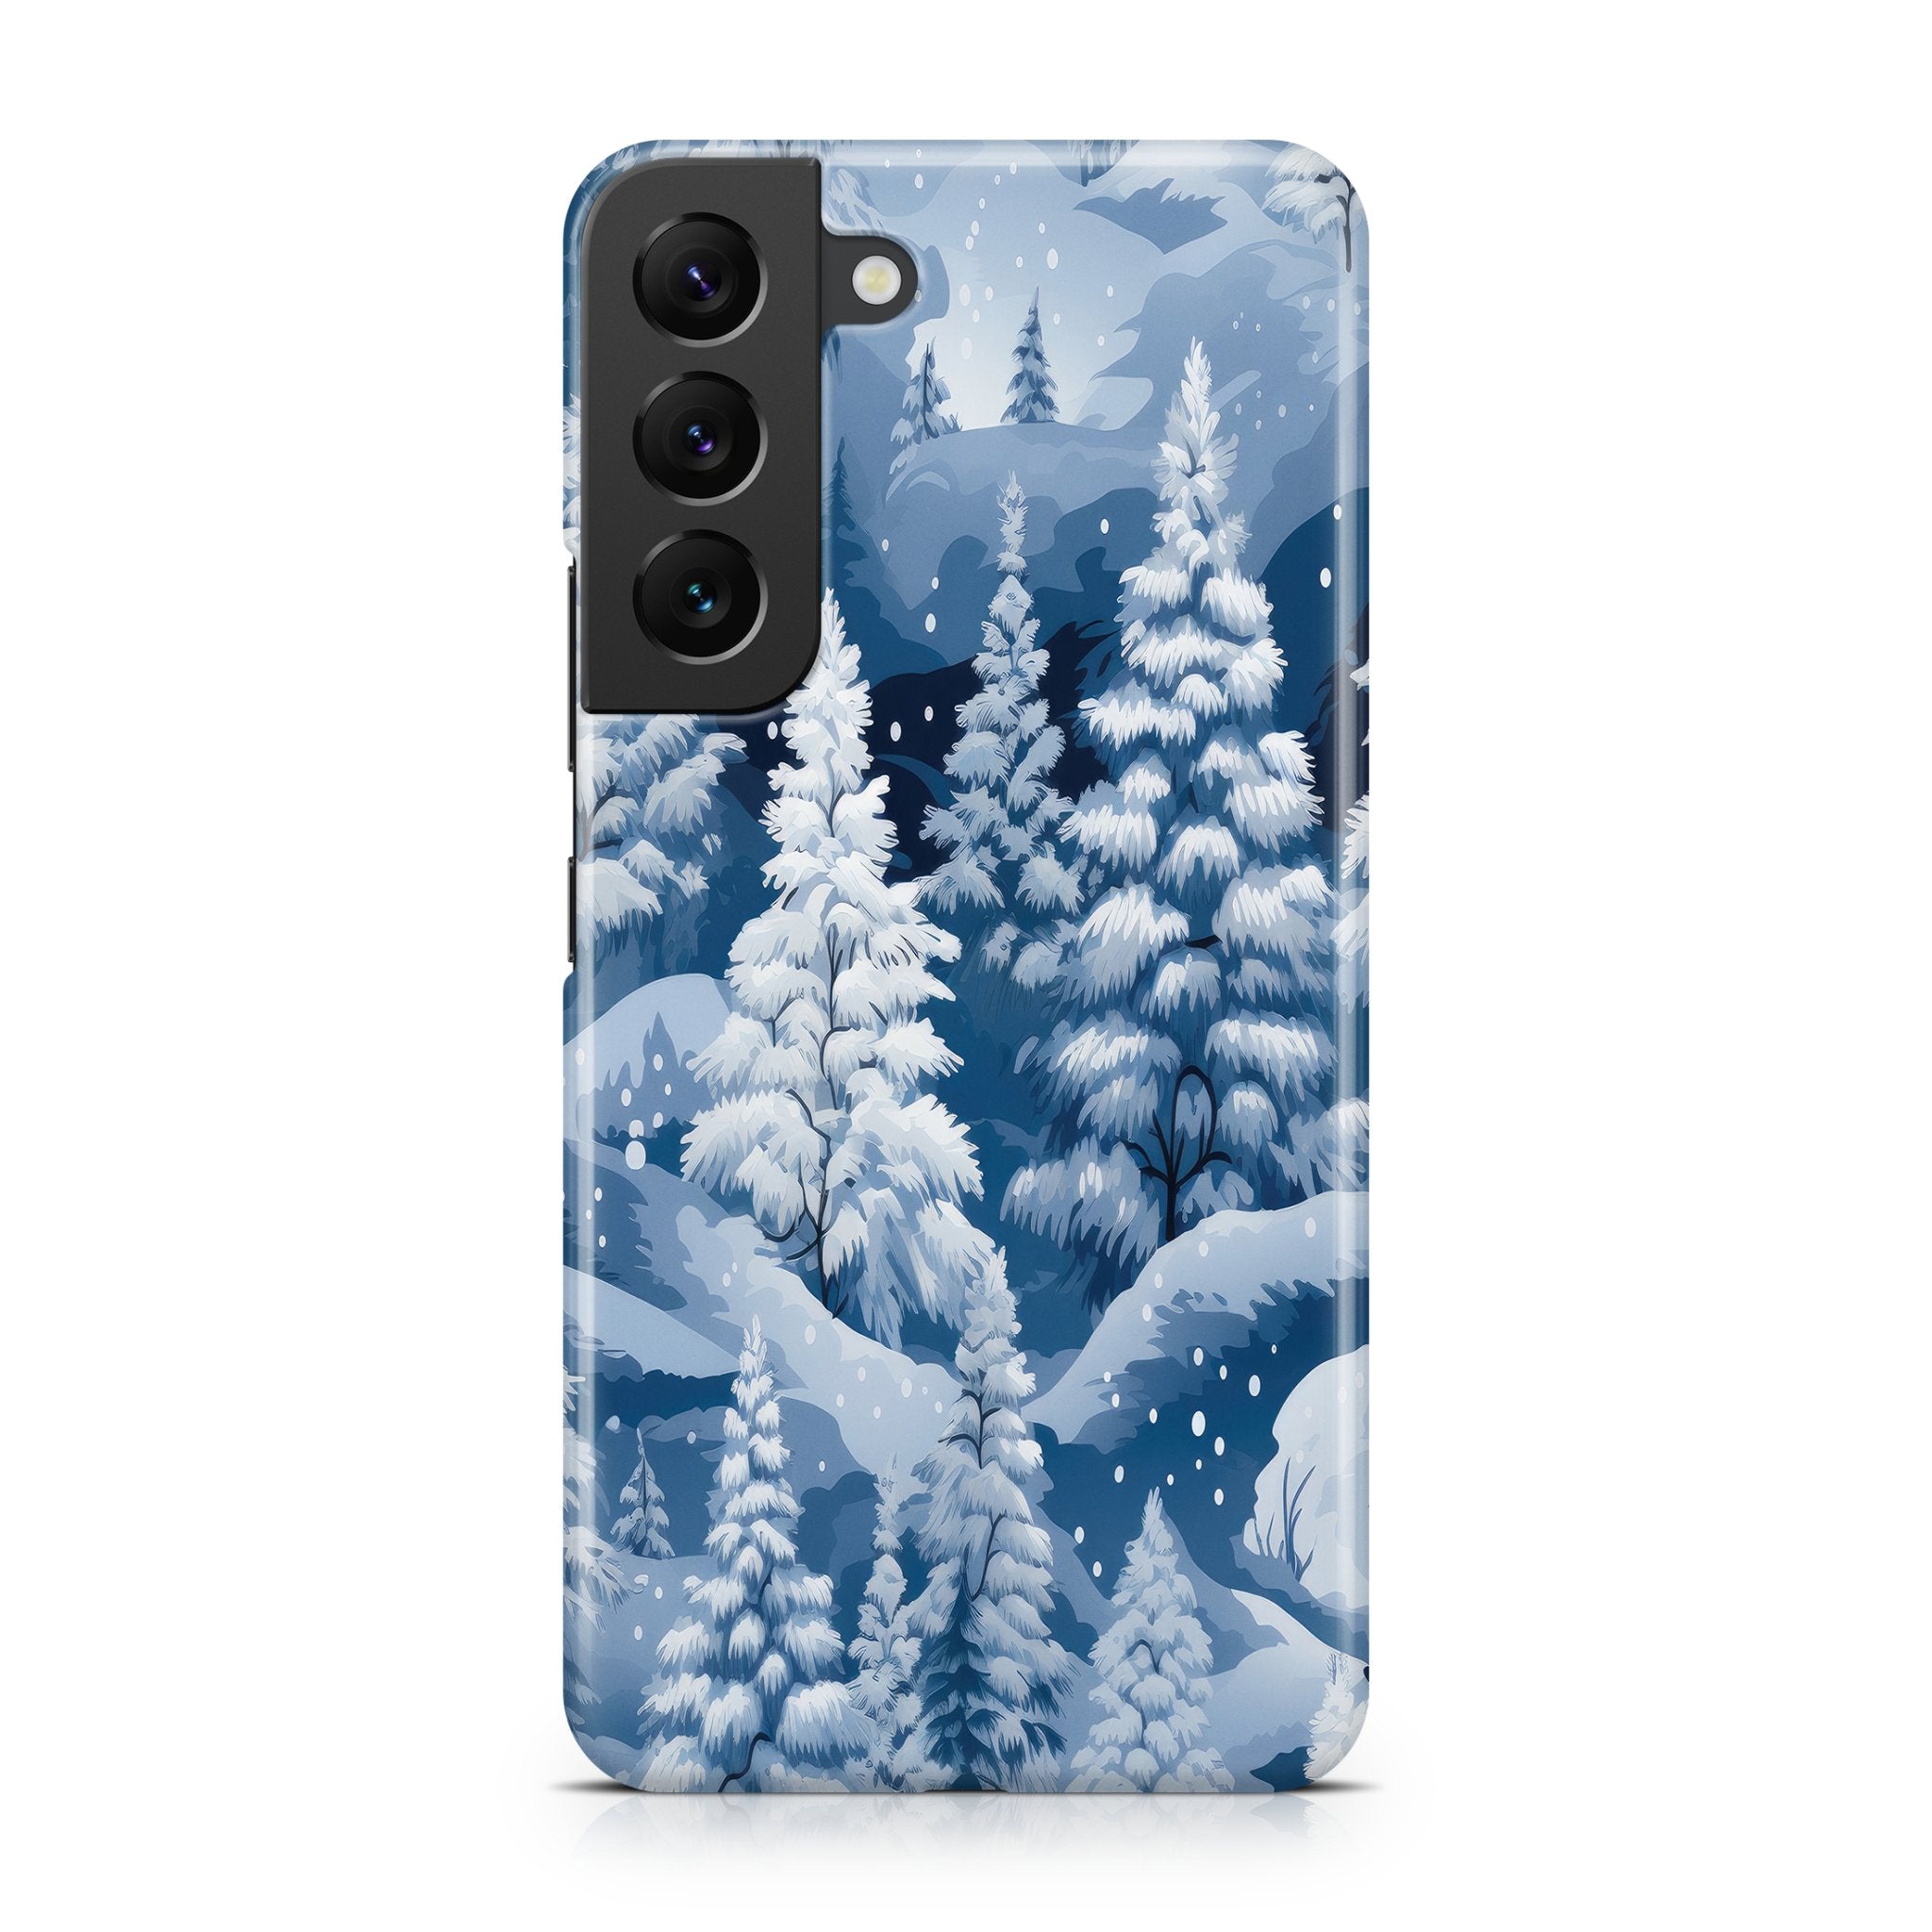 Snowy Symphony - Samsung phone case designs by CaseSwagger